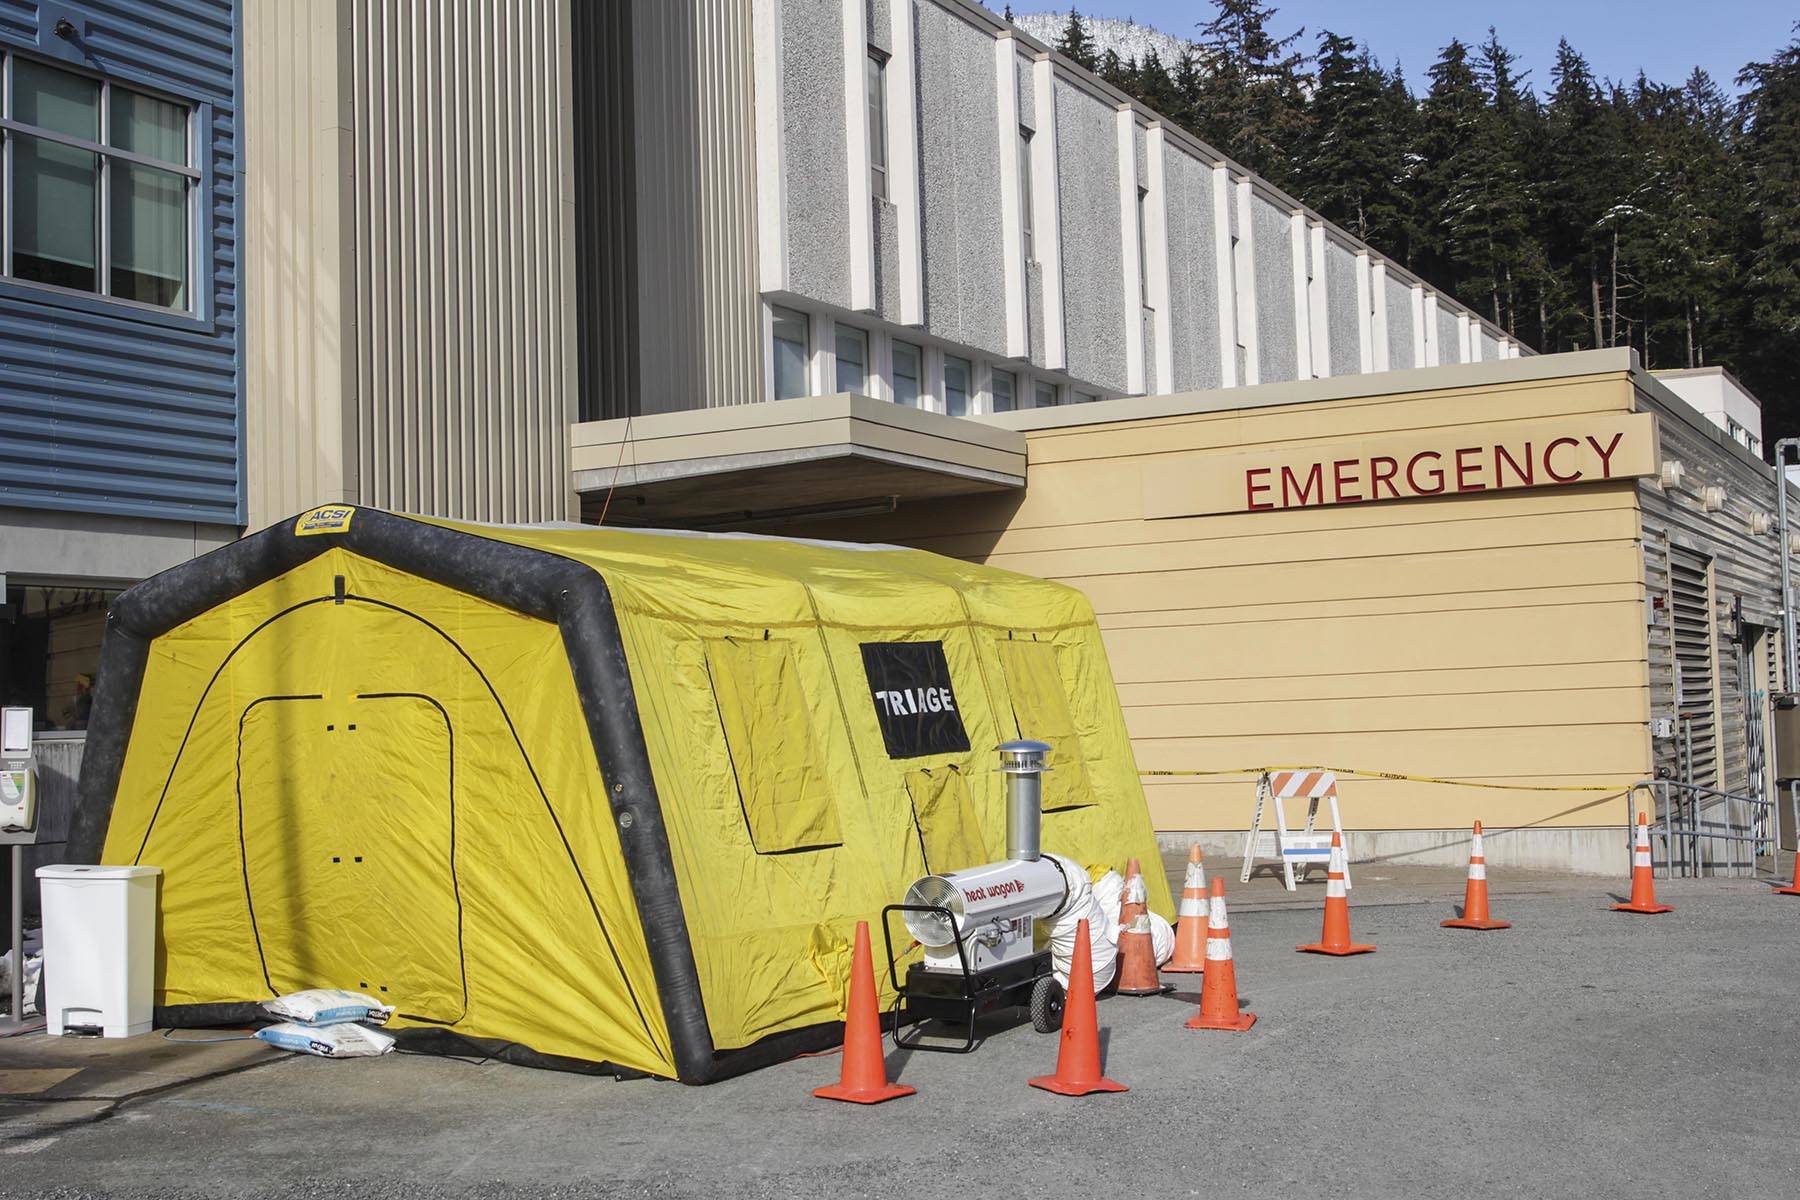 Bartlett Regional Hospital is one of many organizations in Juneau adjusting its operating procedures to deal with the risk of outbreak of the coronavirus. (Michael S. Lockett | Juneau Empire File)